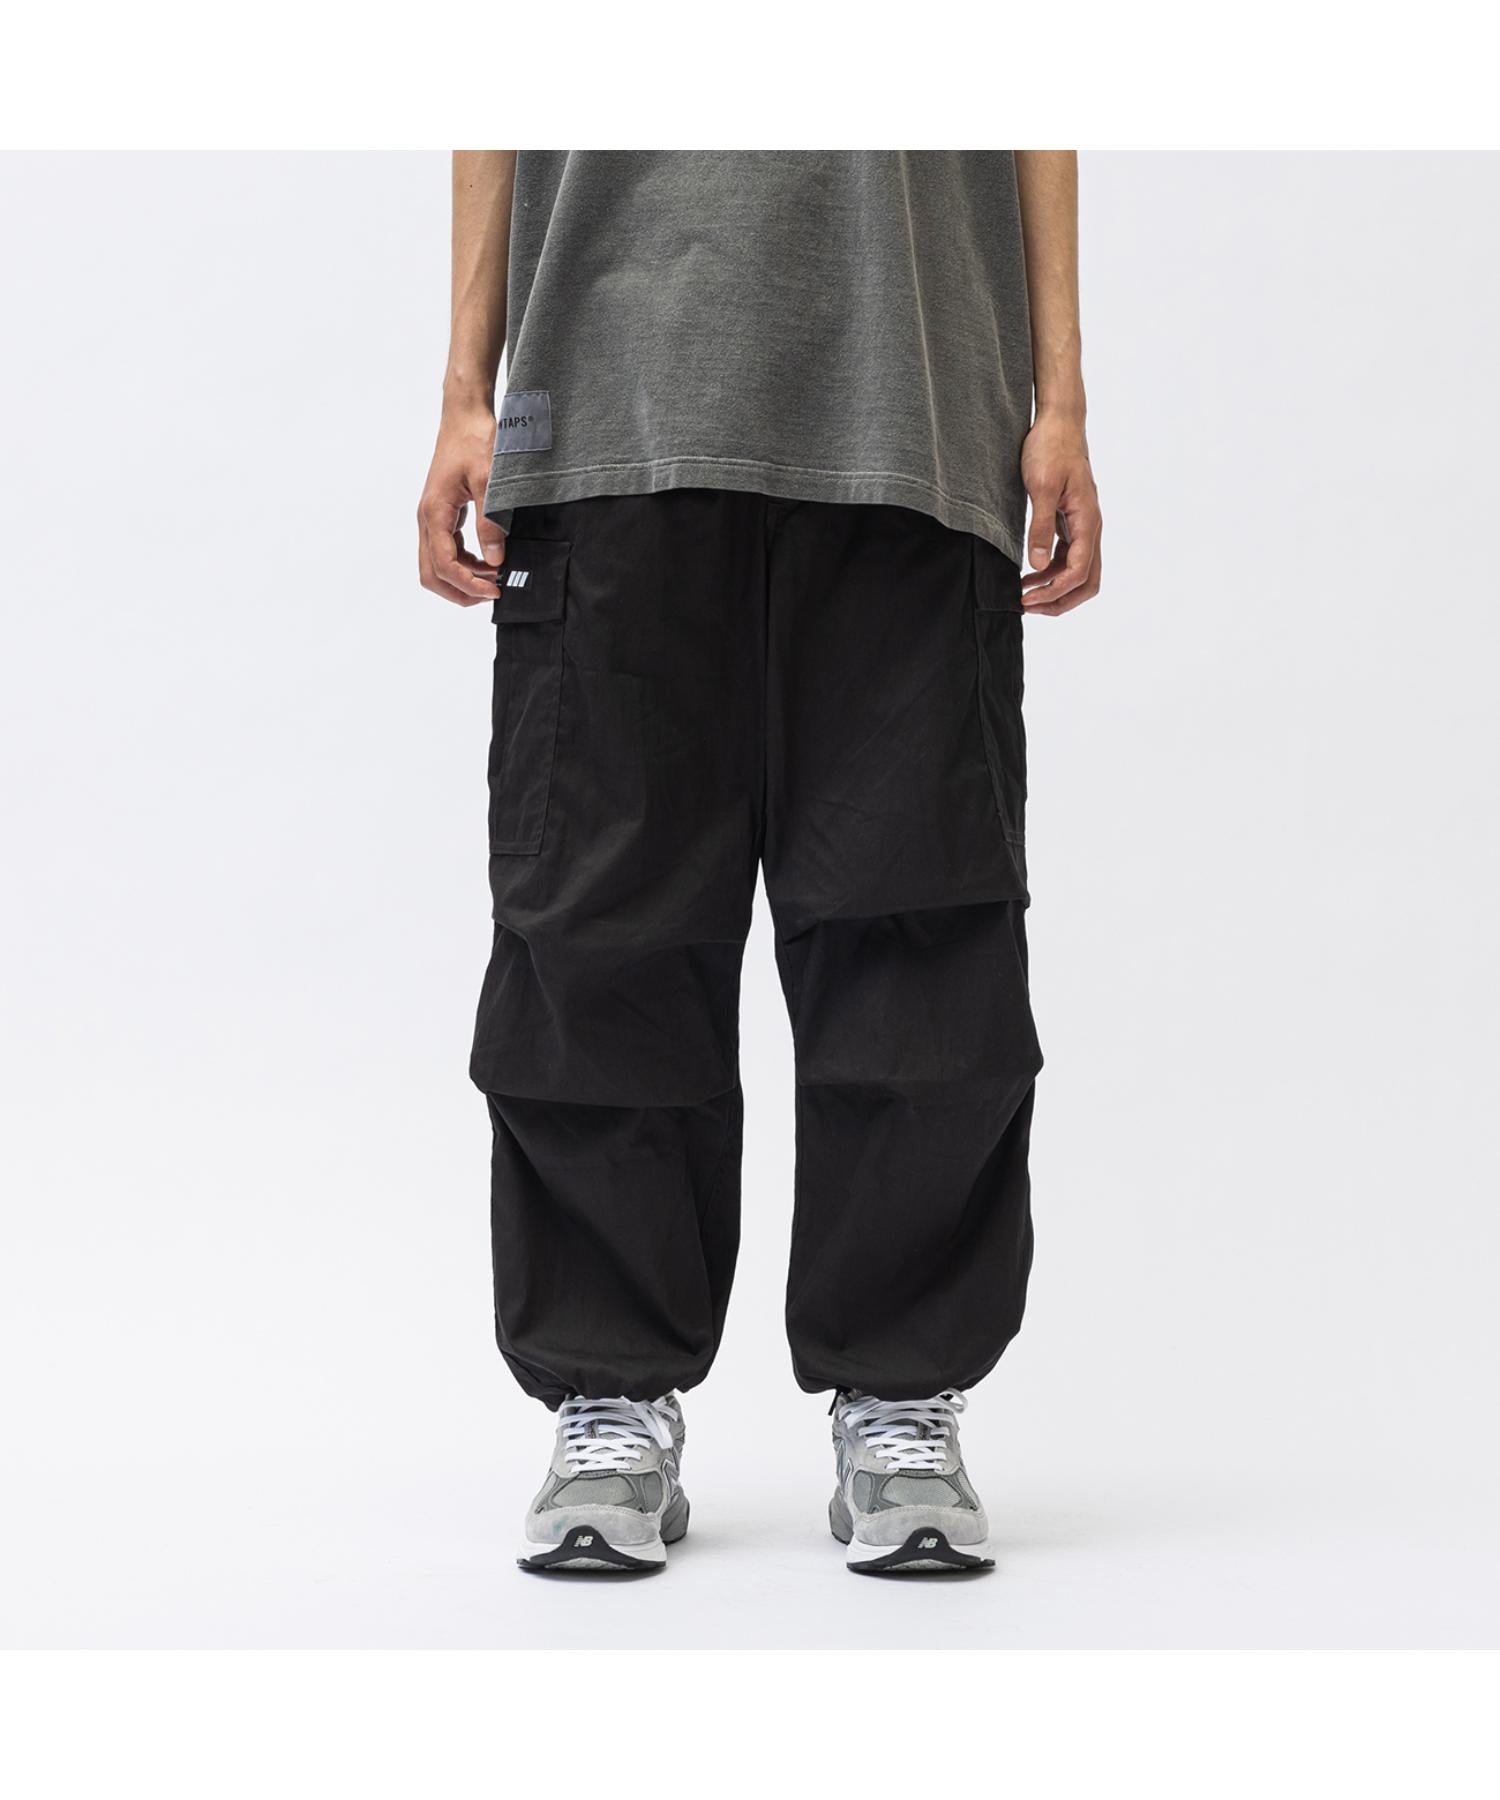 MILT0001 / TROUSERS / NYCO. OXFORD